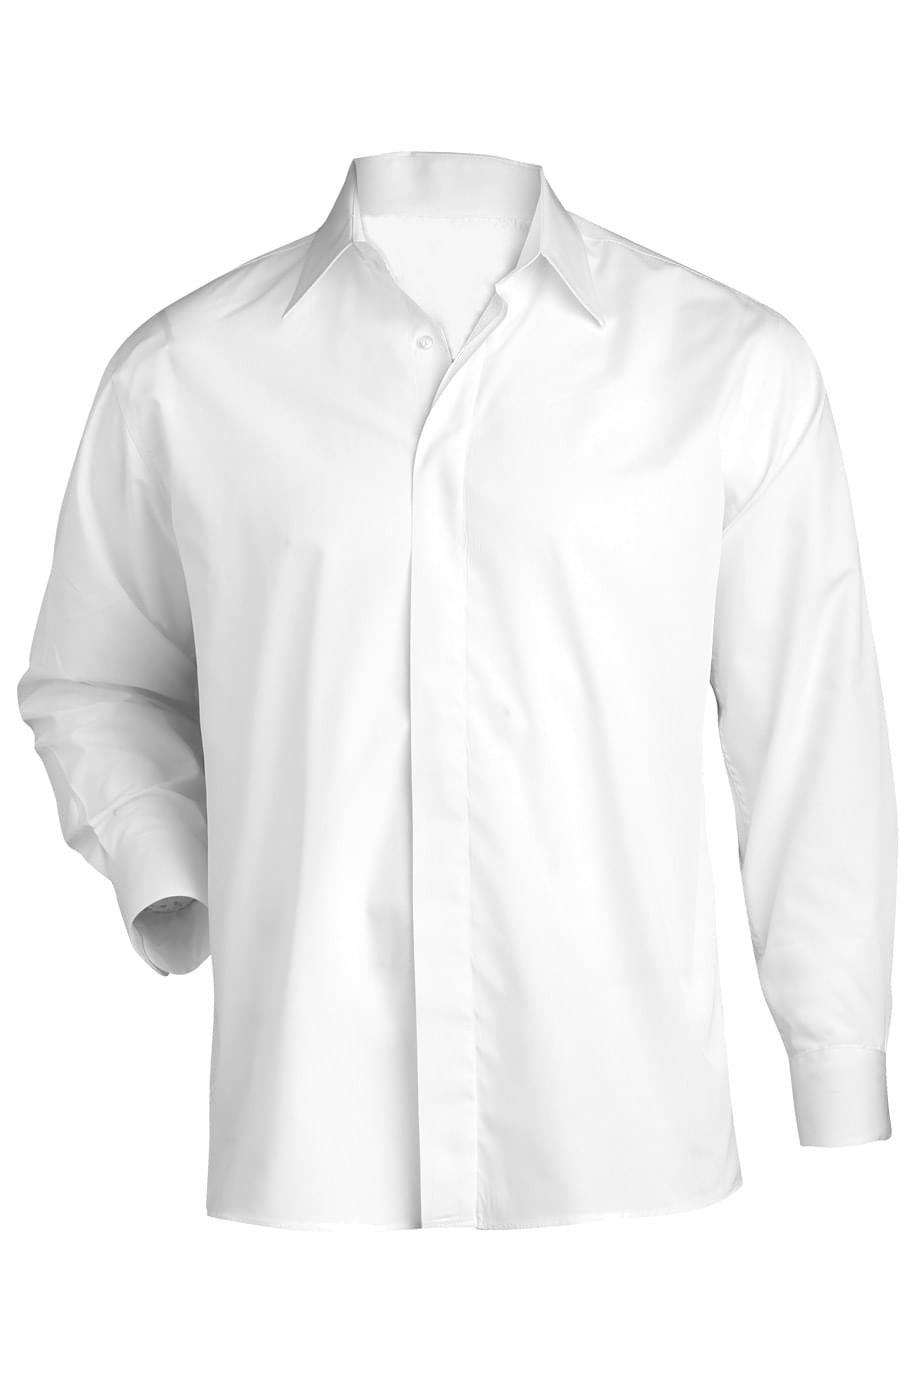 Men's Long Sleeve with Point Collar Shirt, White